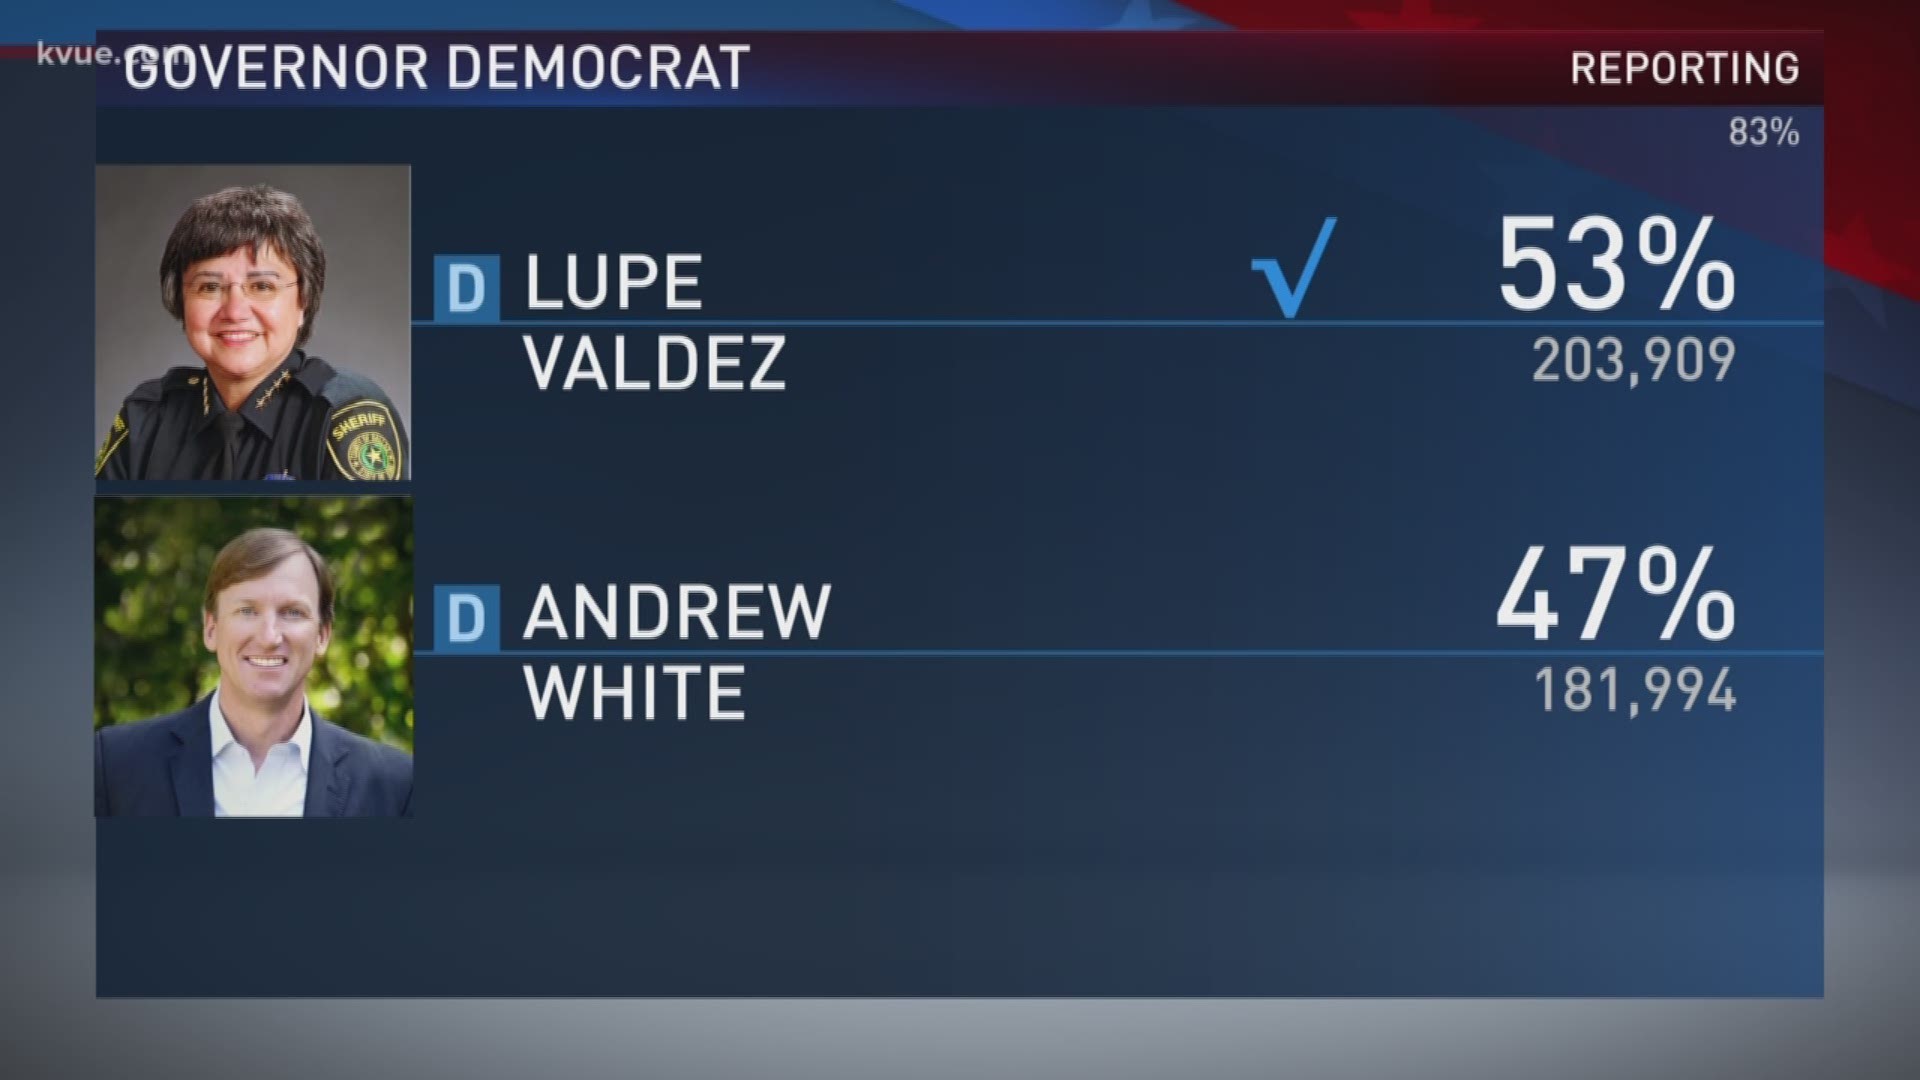 Lupe Valdez will now face Republican candidate Gov. Gregg Abbott in the November election.